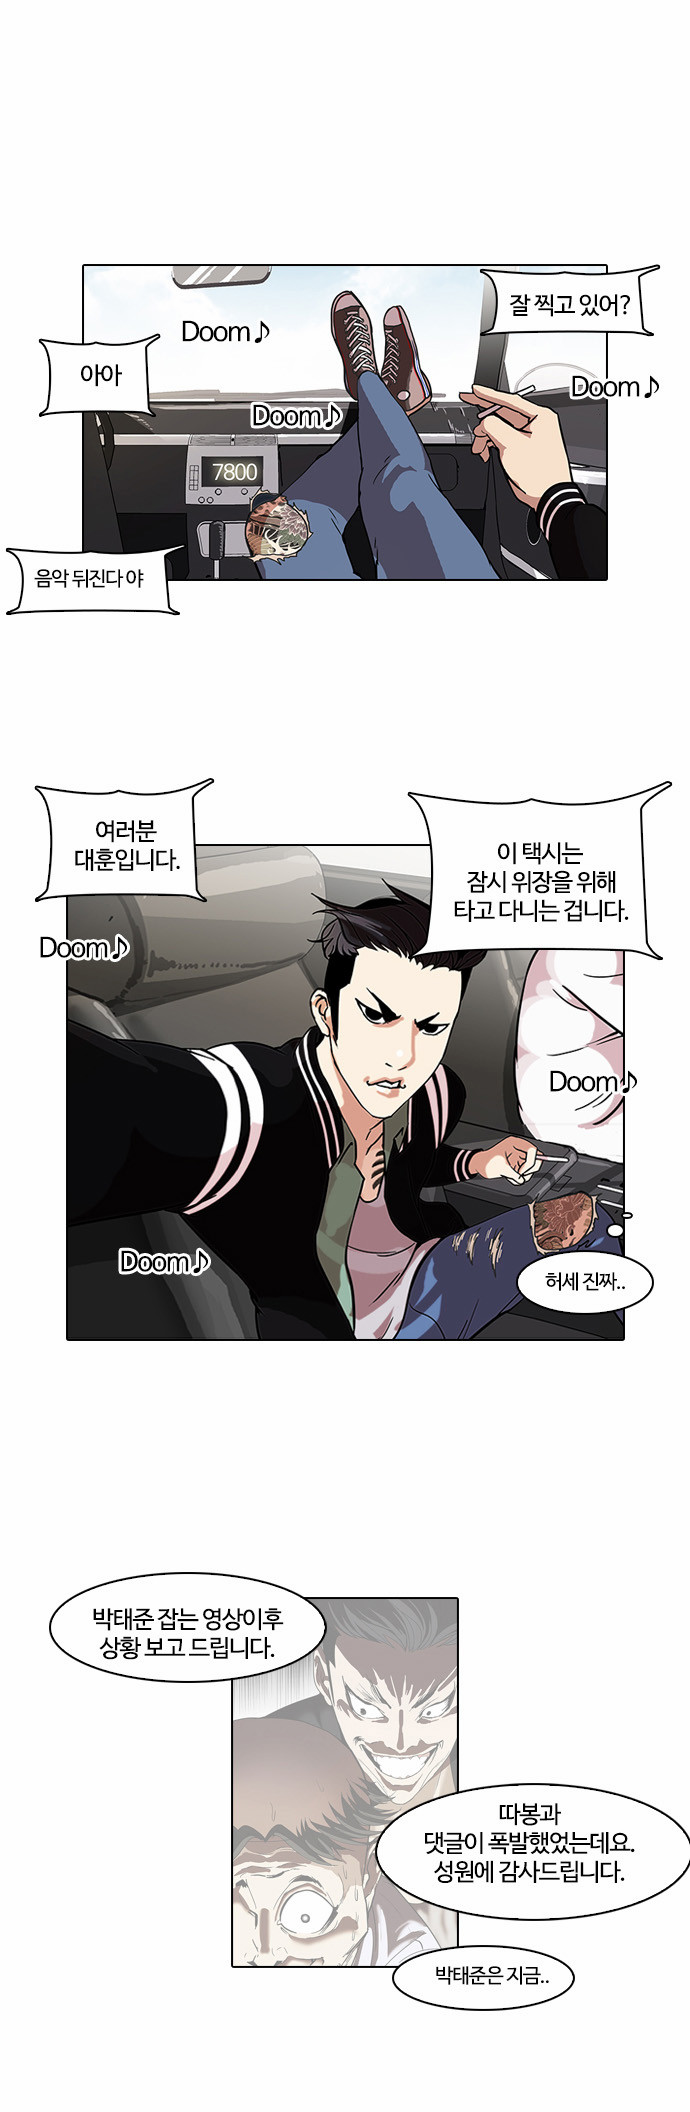 Lookism - Chapter 67 - Page 1